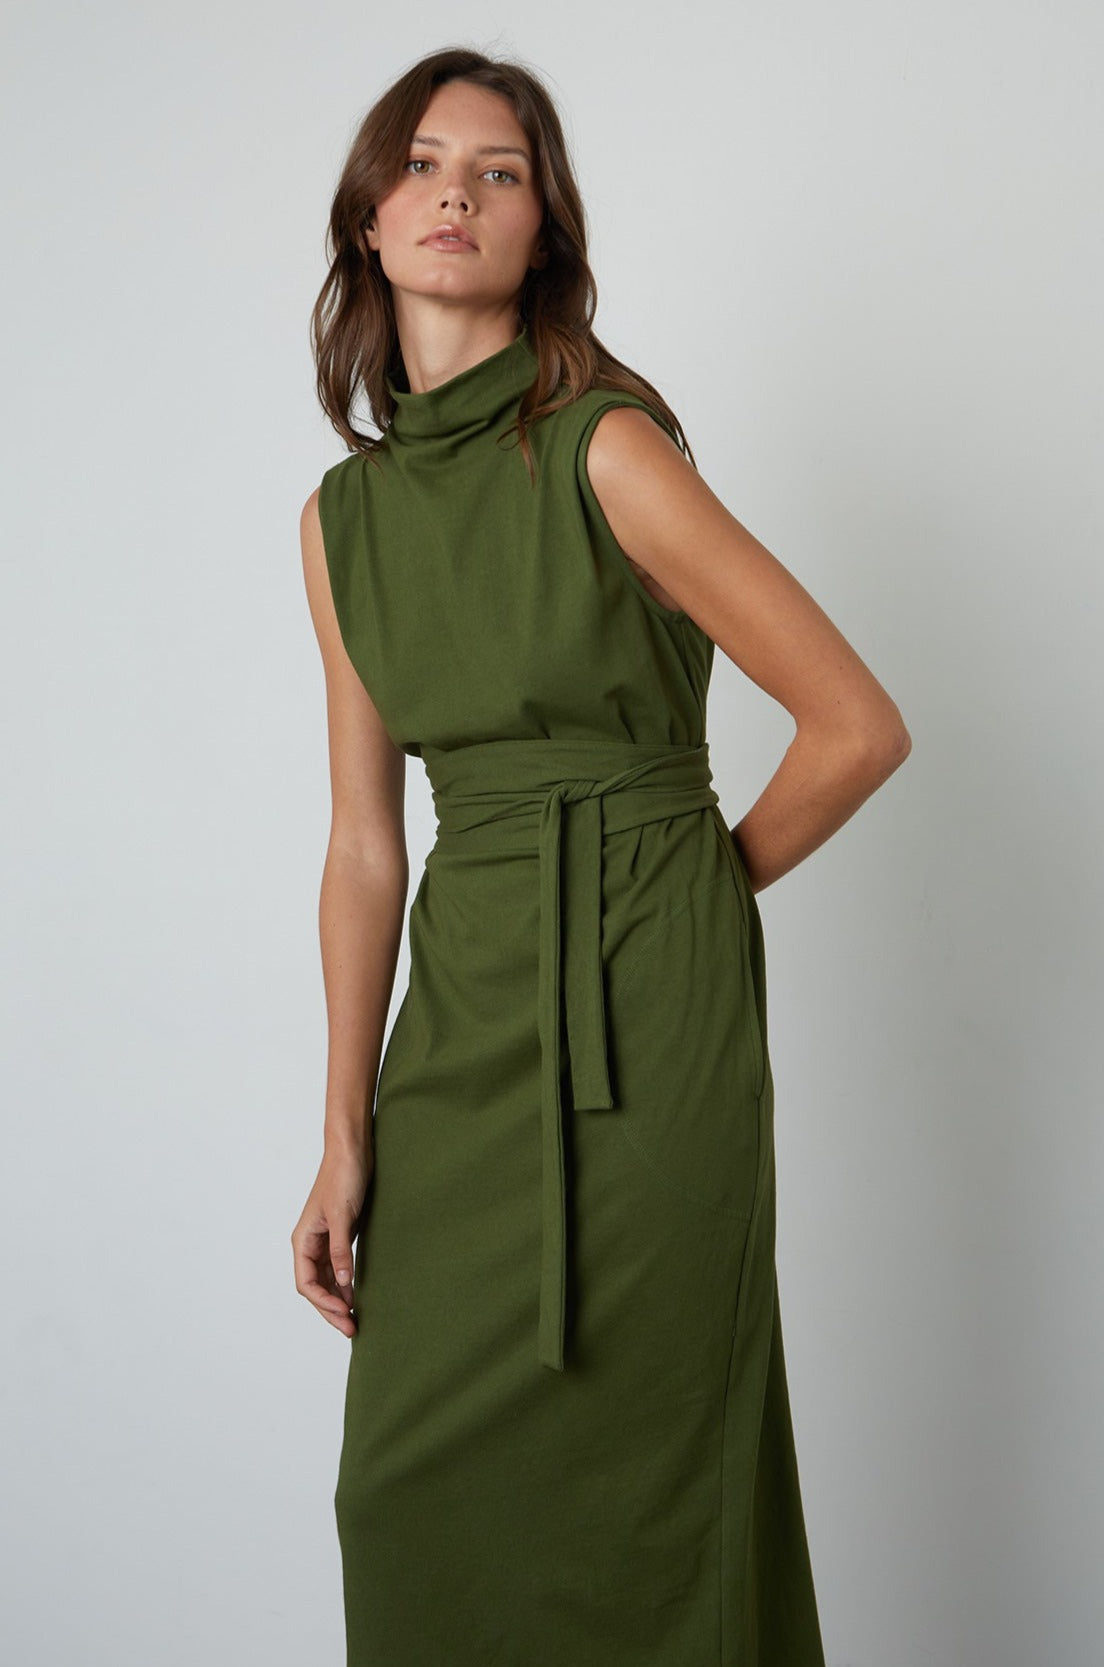   Hydie Mock Neck Dress Structured Cotton in Evergreen with belt close up view 